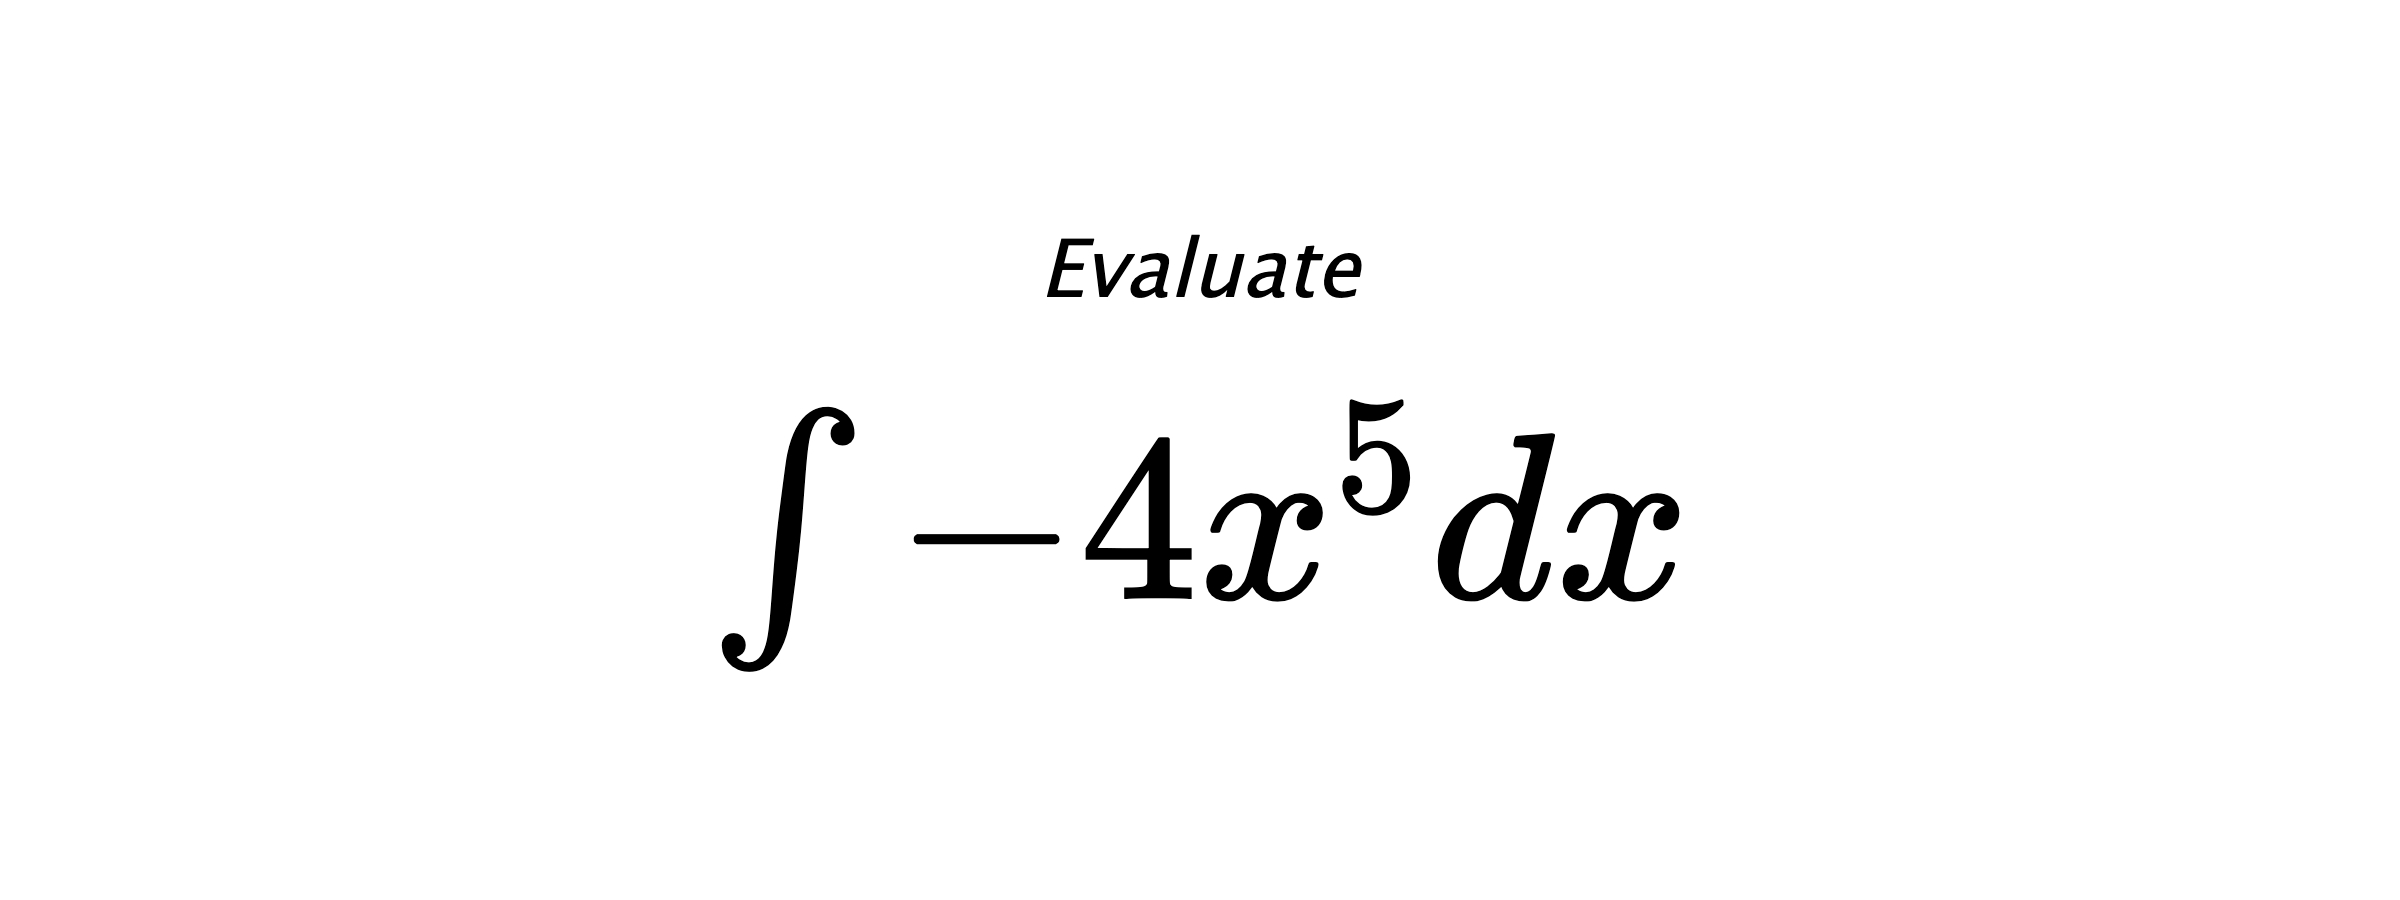 Evaluate $ \int - 4 x^{5} dx $